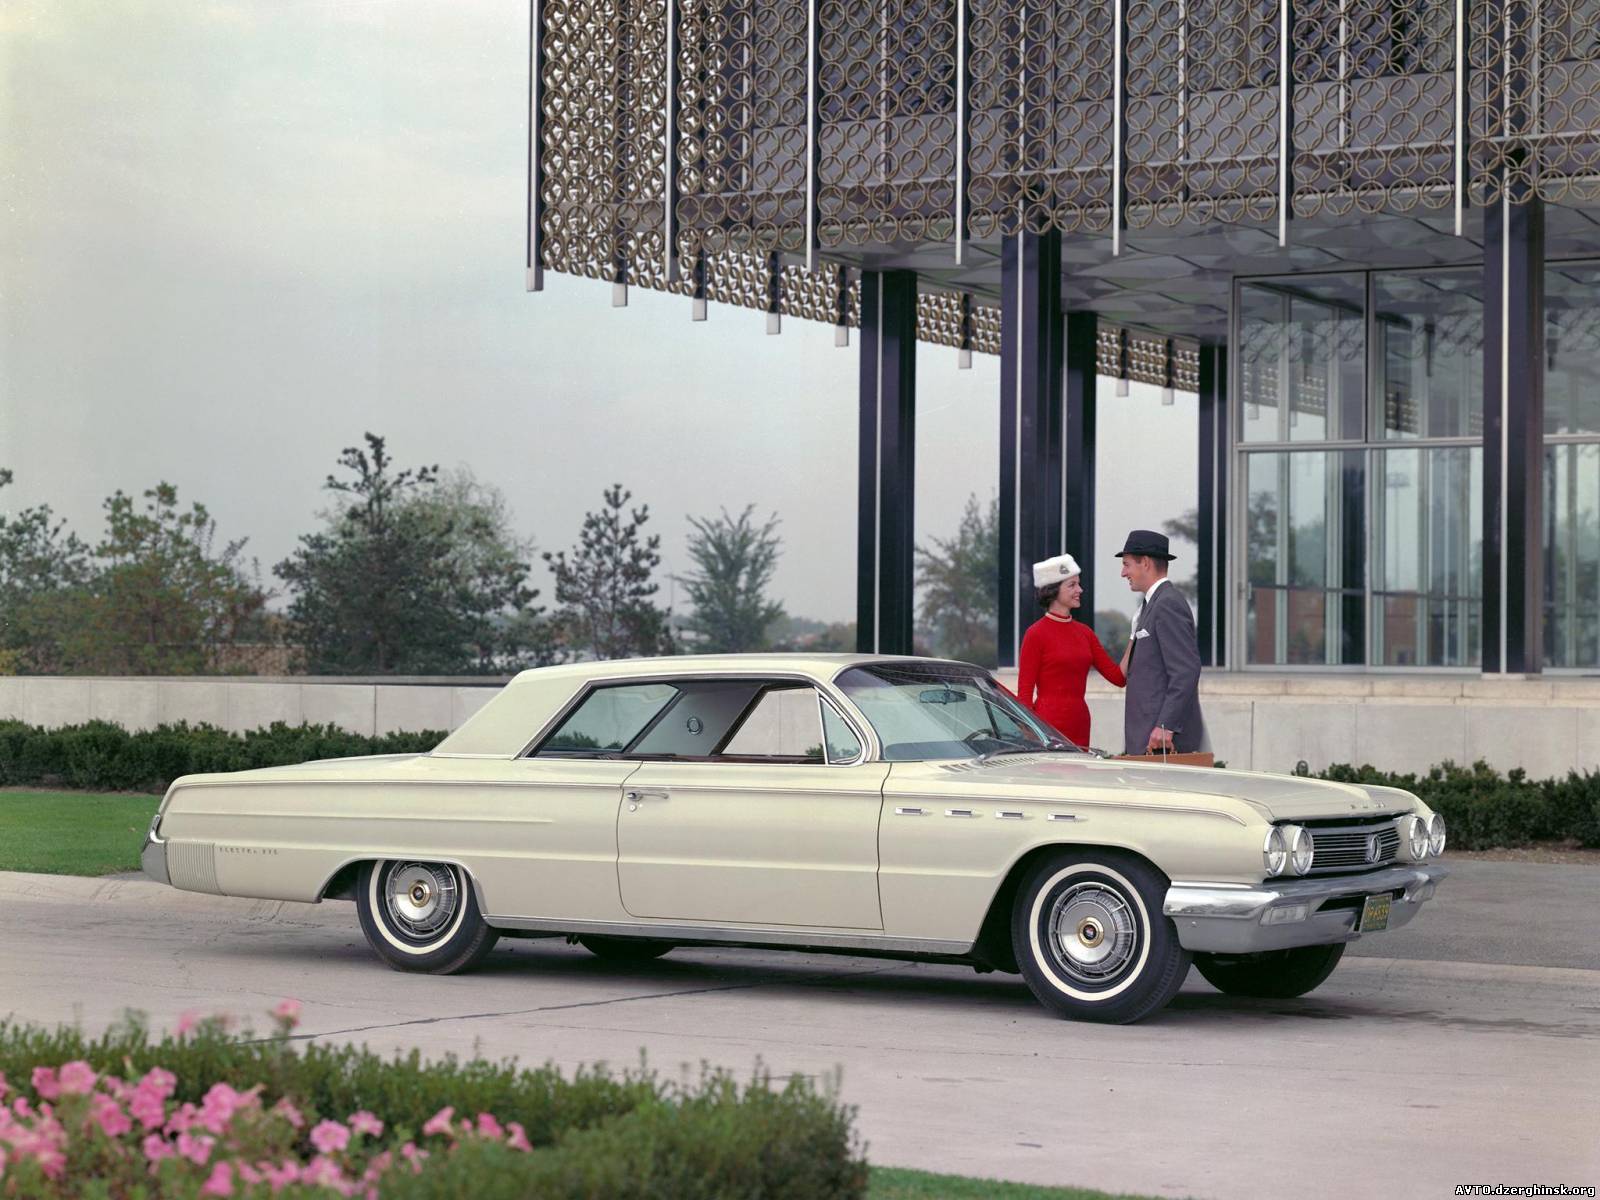 011. Buick Electra 225 1962